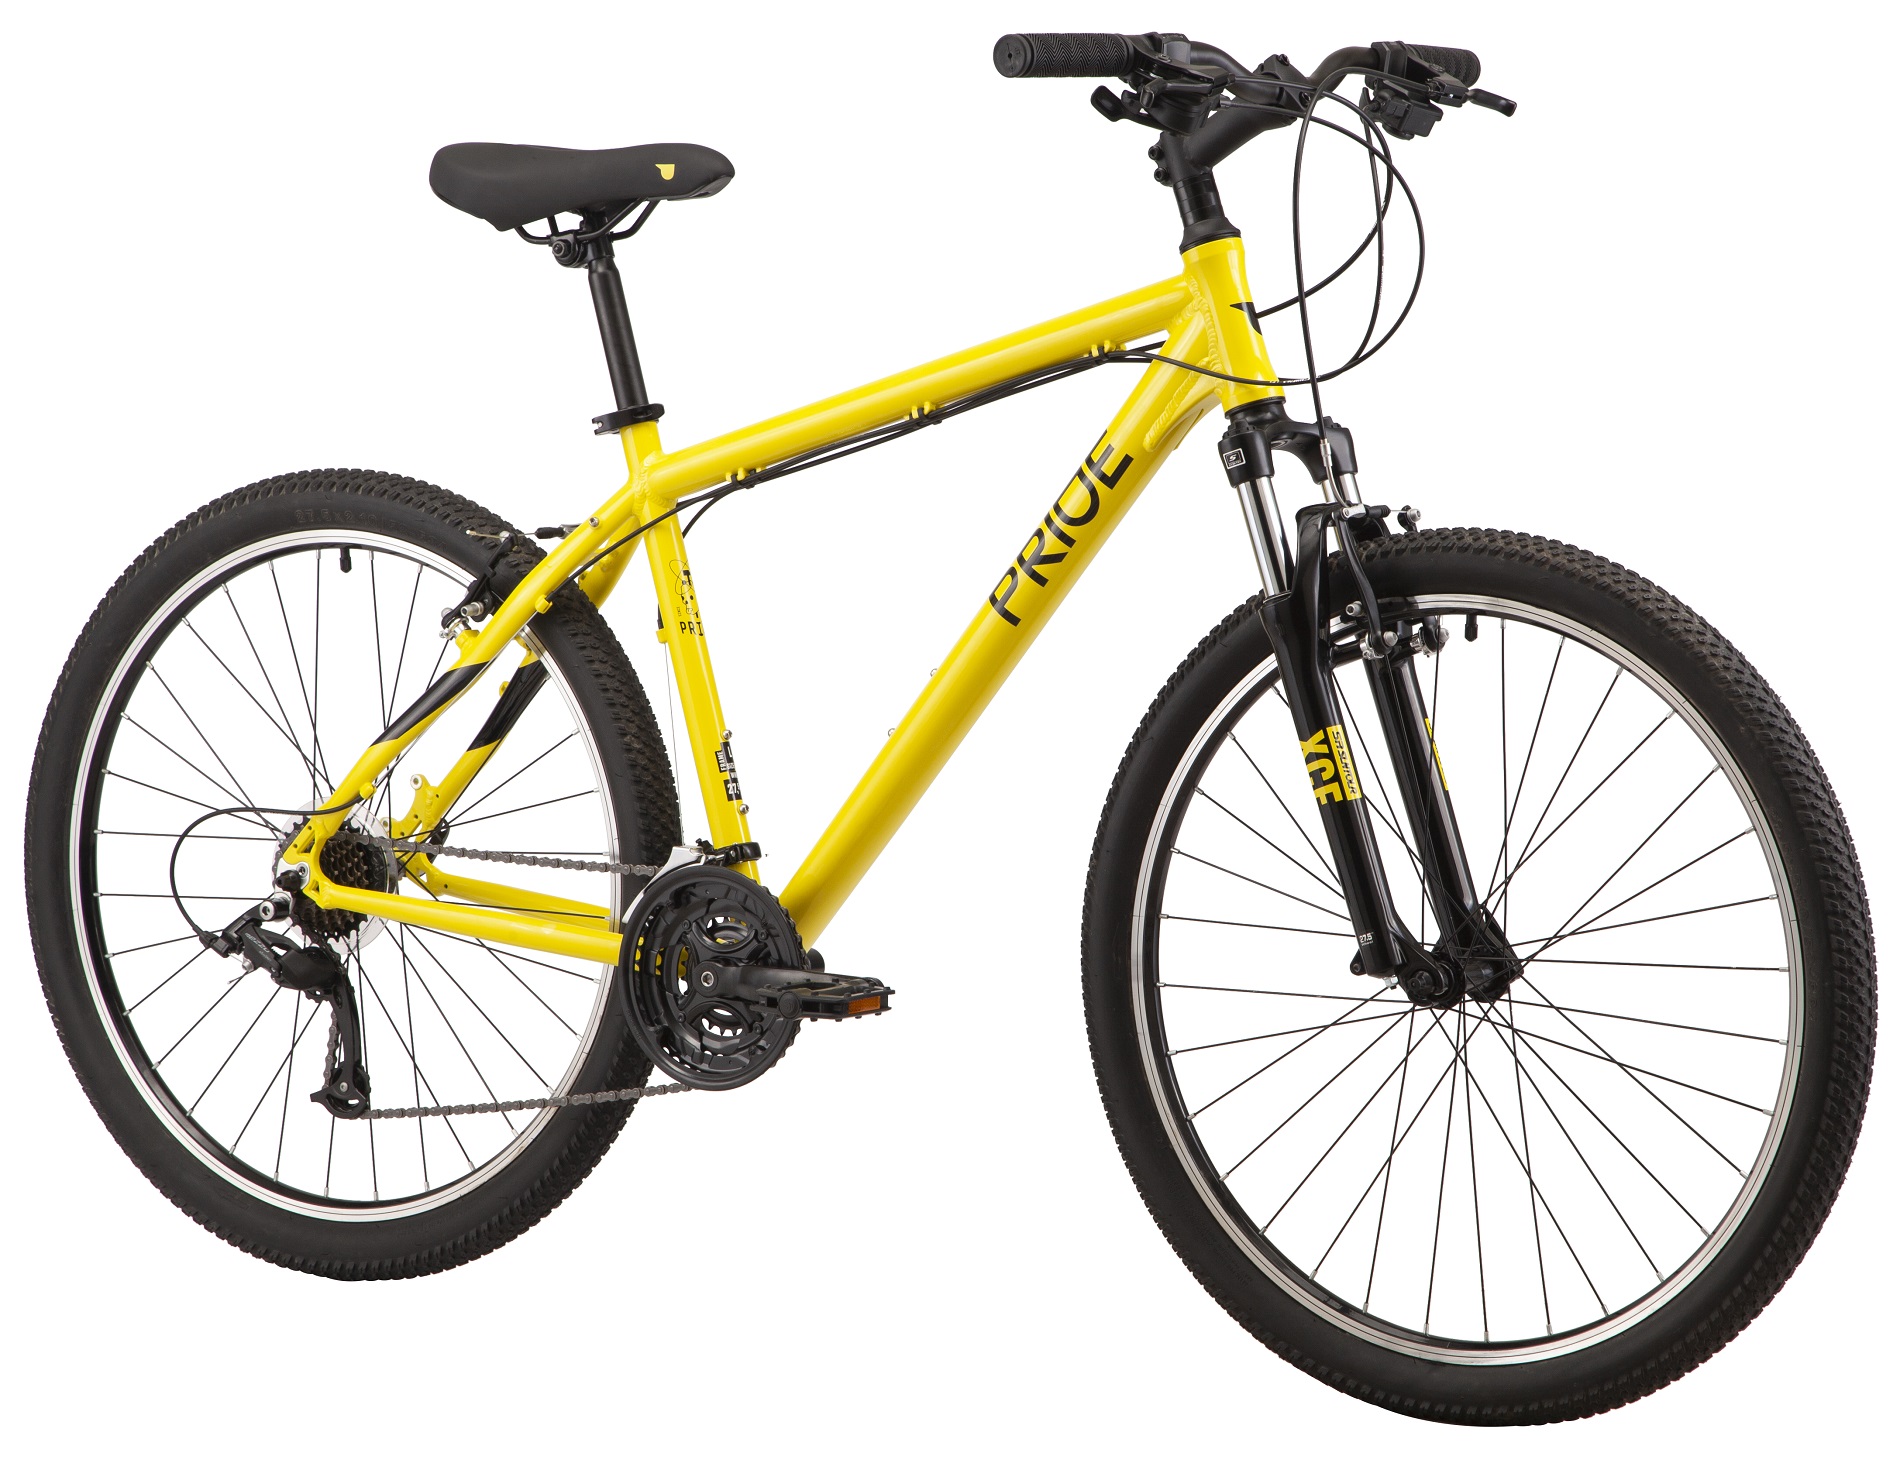 27.5" PRIDE MARVEL 7.1 frame - L 2022 yellow (rear and front switches and tamnet - Microshift) Photo 2